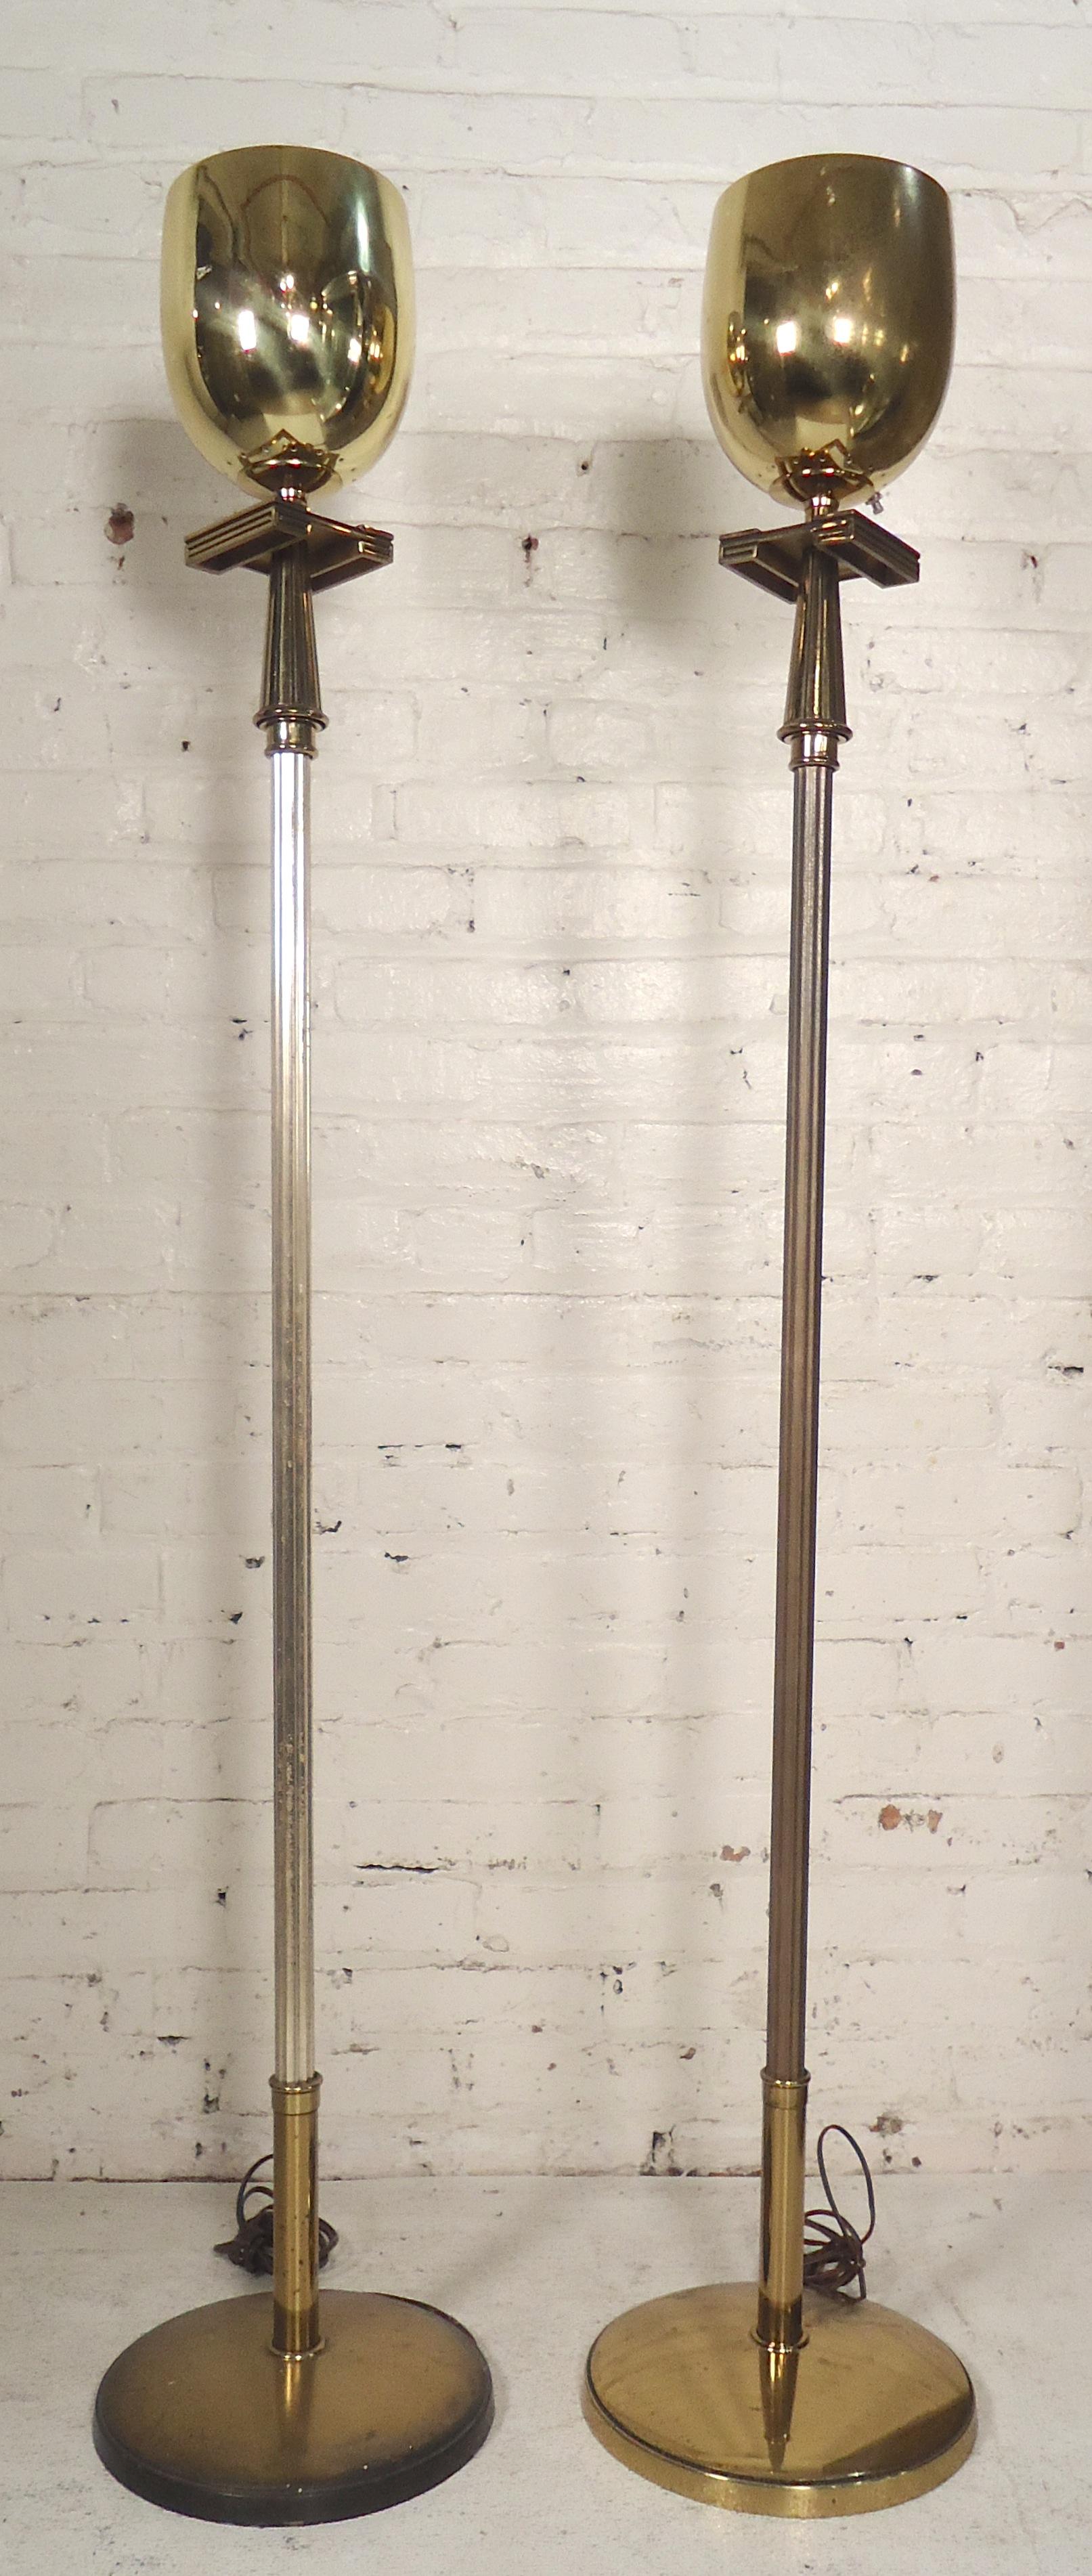 Mid-Century Modern brass floor lamps with up lighting. Attractive detailing throughout.

(Please confirm item location - NY or NJ - with dealer).
 